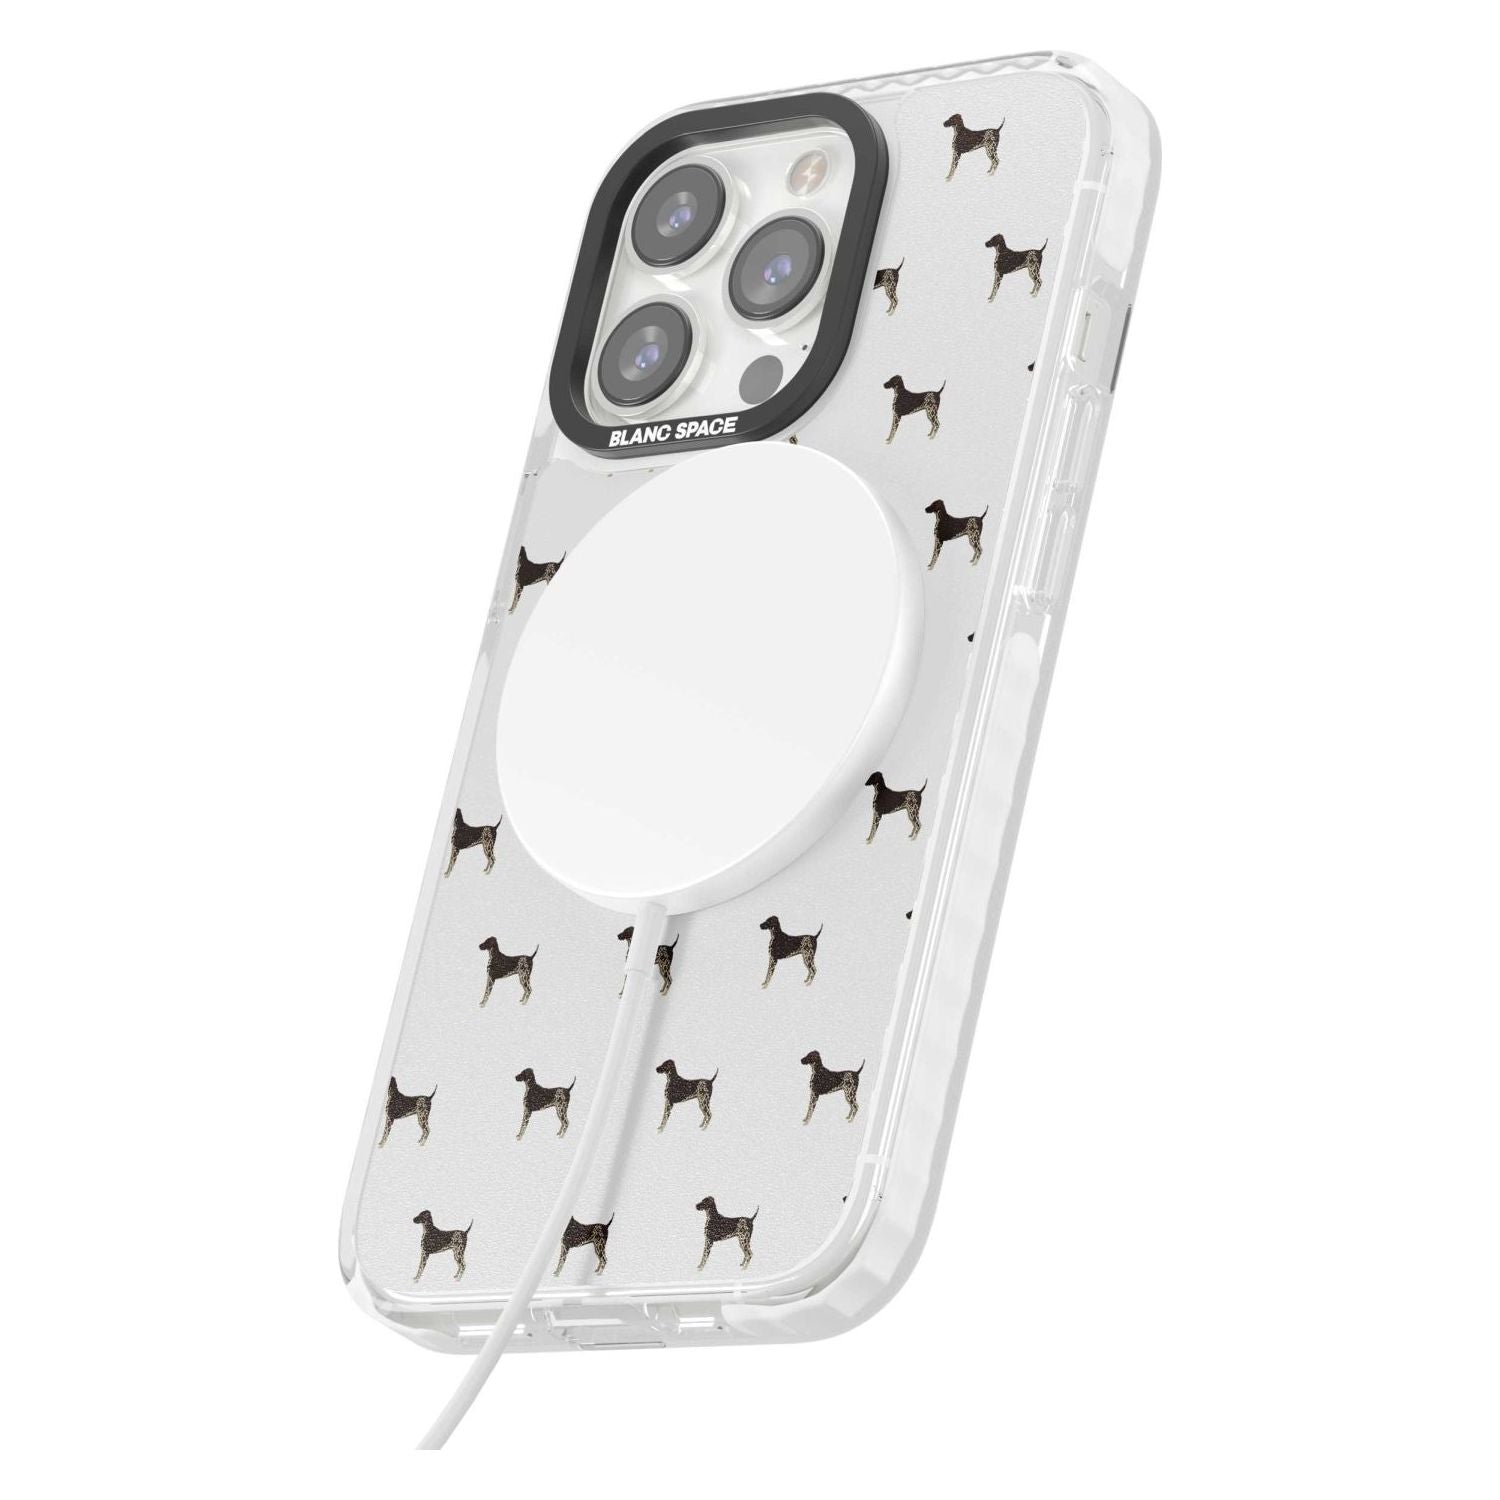 German Shorthaired Pointer Dog Pattern Phone Case iPhone 15 Pro Max / Black Impact Case,iPhone 15 Plus / Black Impact Case,iPhone 15 Pro / Black Impact Case,iPhone 15 / Black Impact Case,iPhone 15 Pro Max / Impact Case,iPhone 15 Plus / Impact Case,iPhone 15 Pro / Impact Case,iPhone 15 / Impact Case,iPhone 15 Pro Max / Magsafe Black Impact Case,iPhone 15 Plus / Magsafe Black Impact Case,iPhone 15 Pro / Magsafe Black Impact Case,iPhone 15 / Magsafe Black Impact Case,iPhone 14 Pro Max / Black Impact Case,iPhon